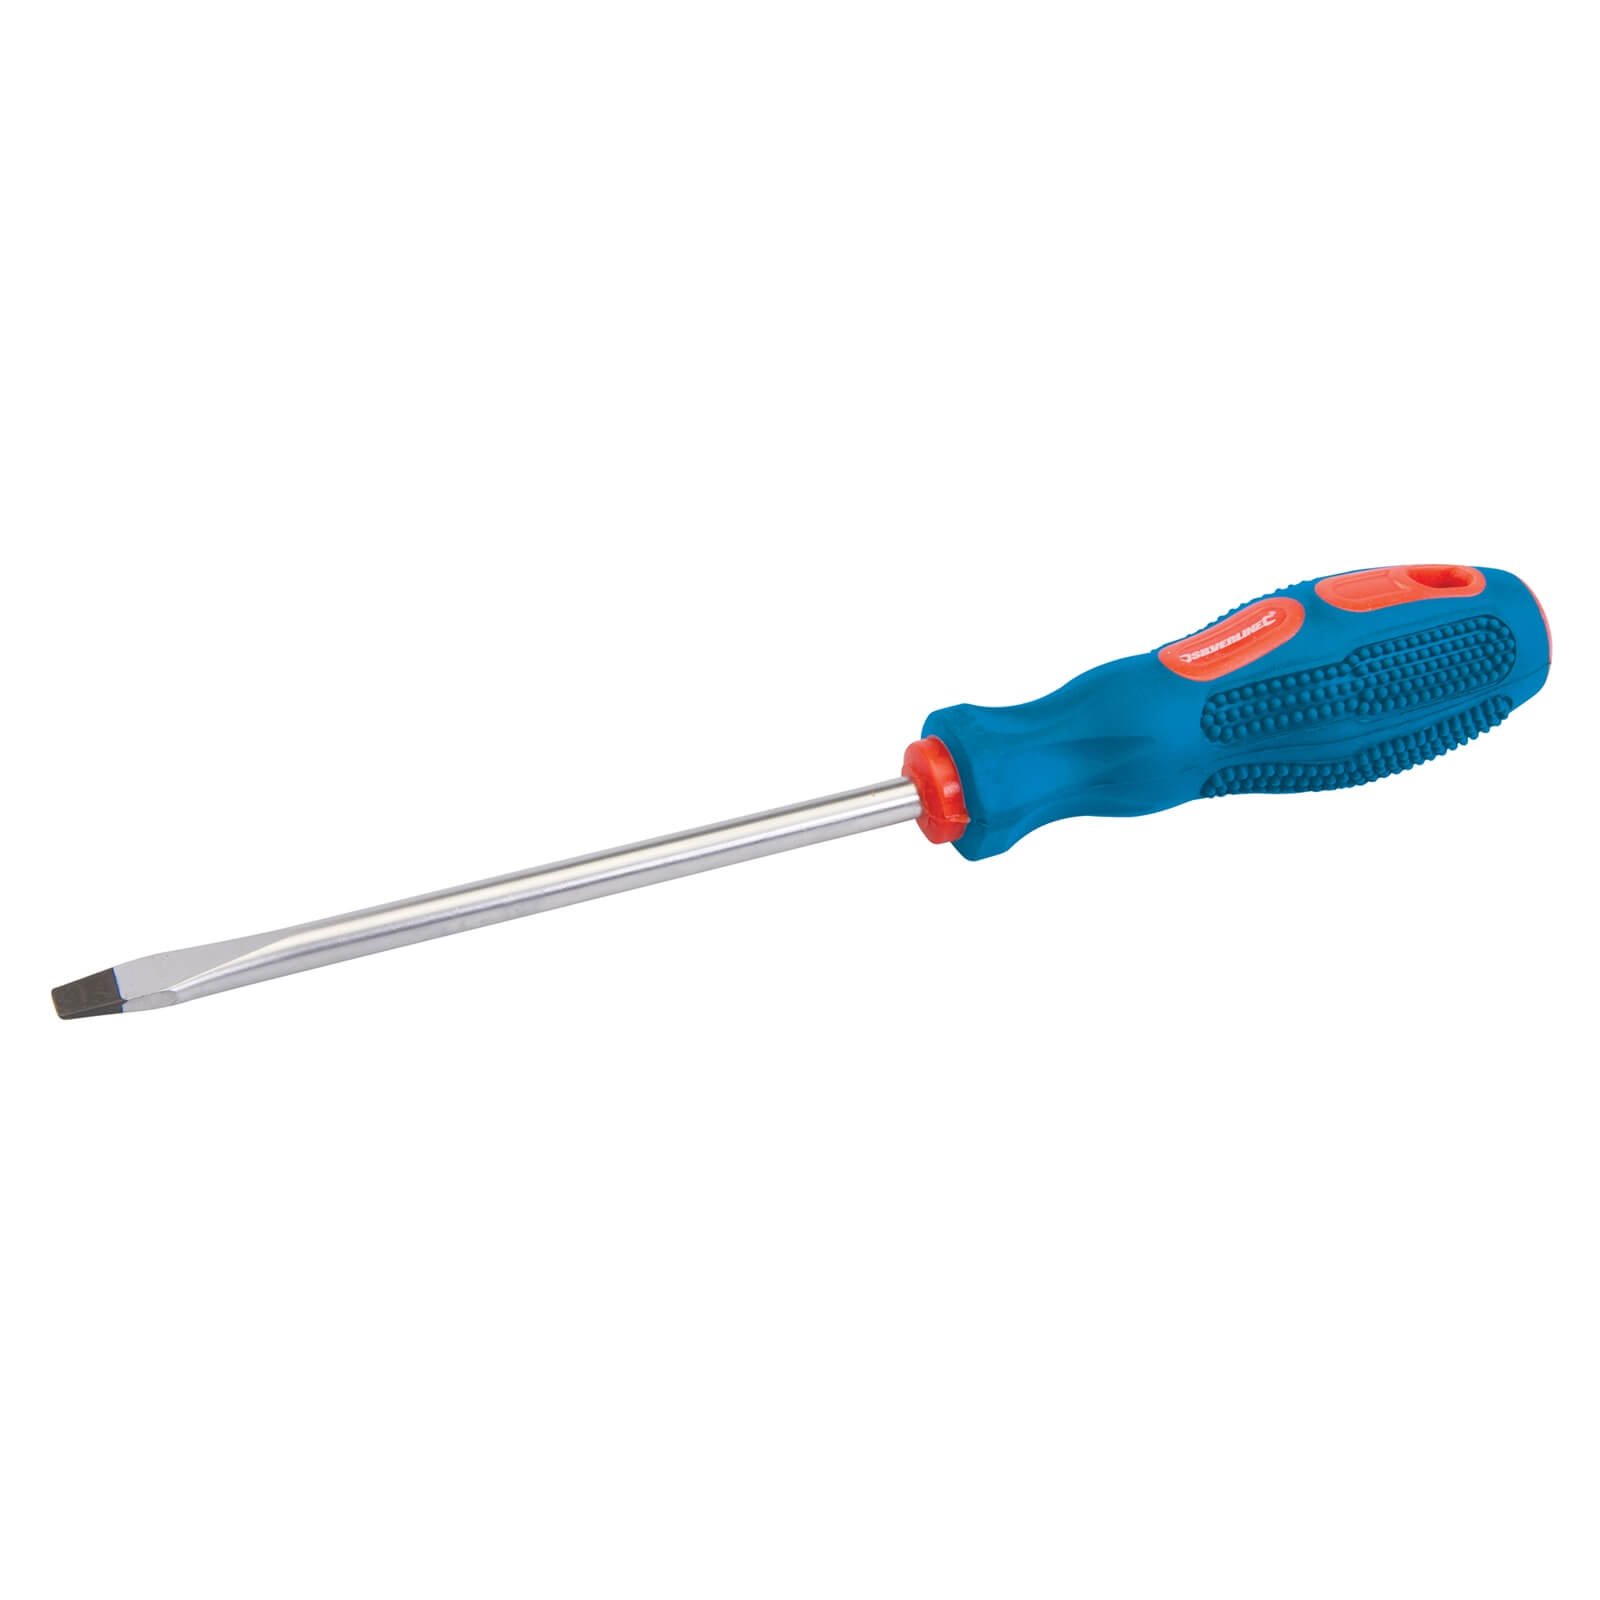 Silverline General Purpose Screwdriver Slotted Flared 6 x 100mm